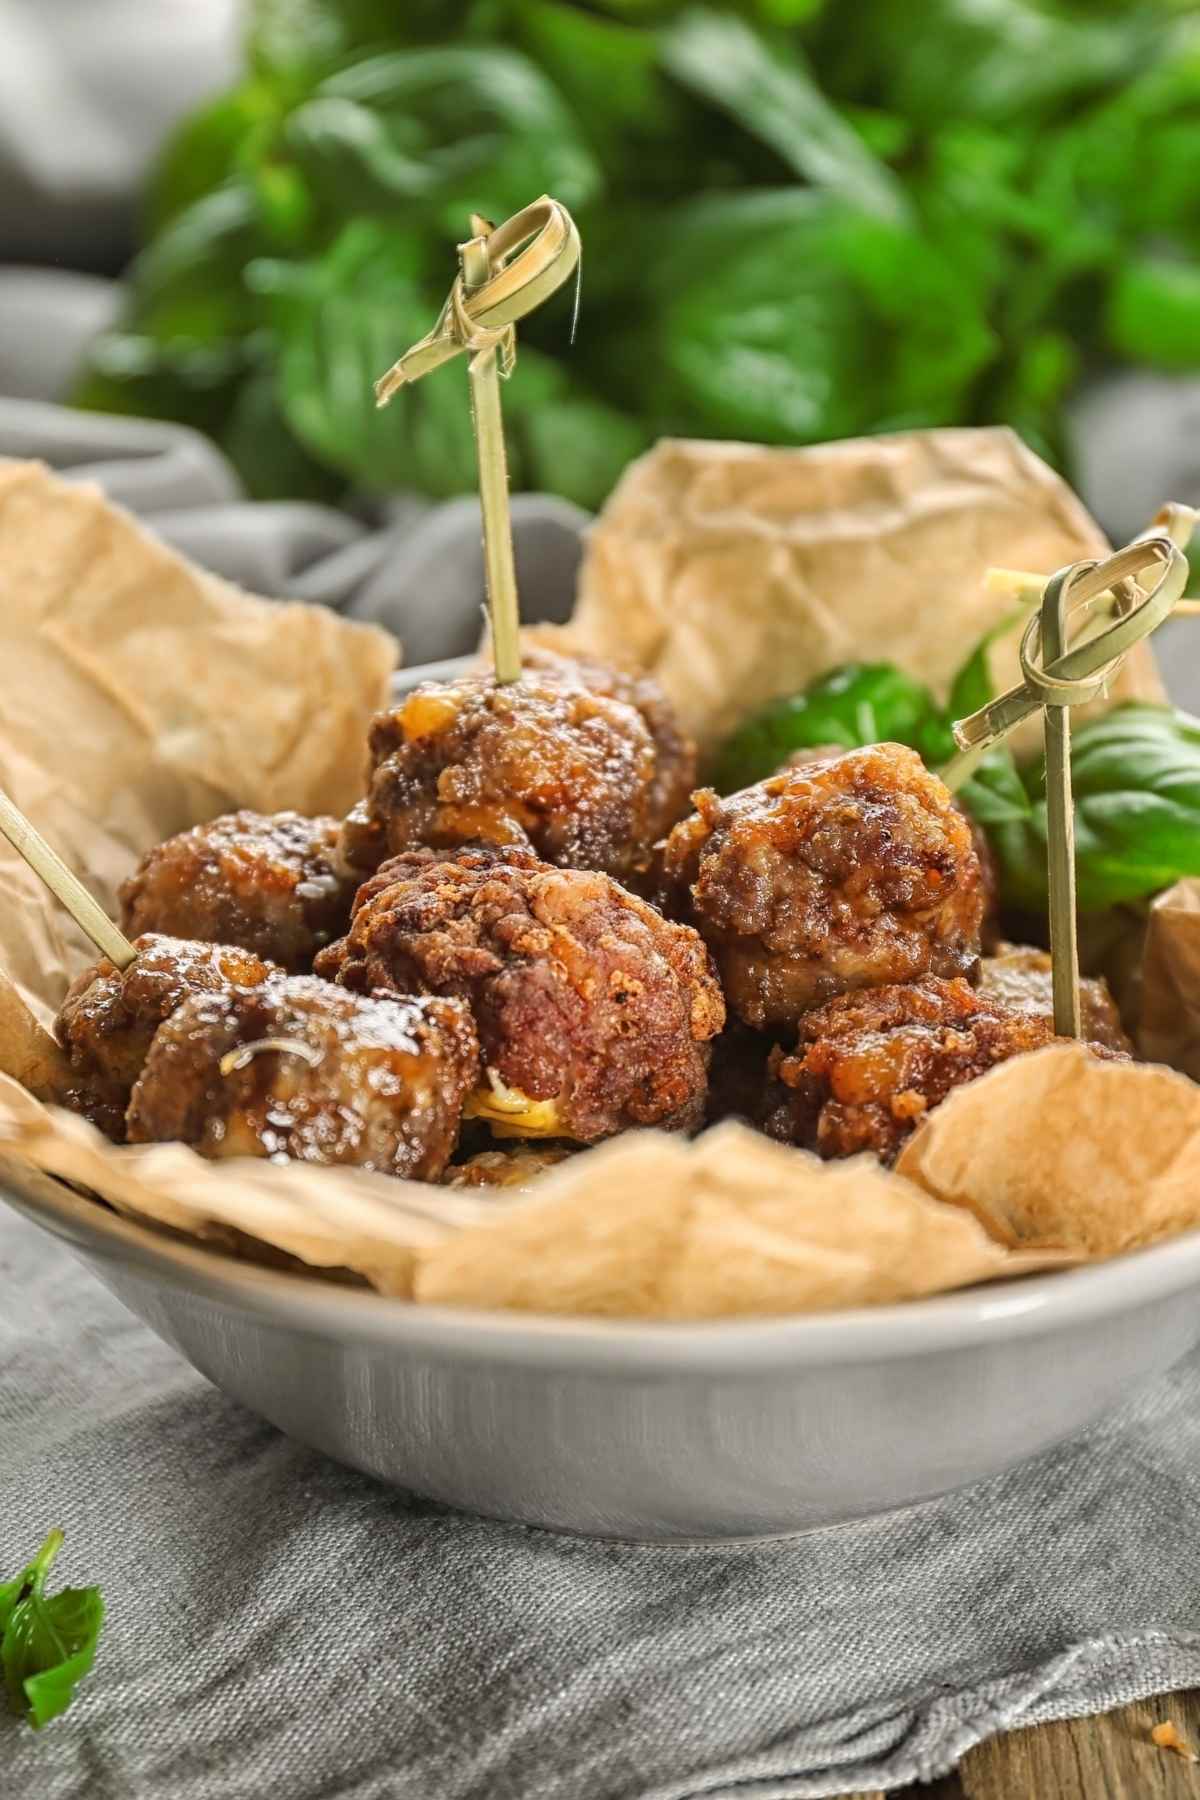 These savory Sausage Balls come together with just 5 ingredients. They have a delicious cheesy flavor that pairs well with the pork sausage.